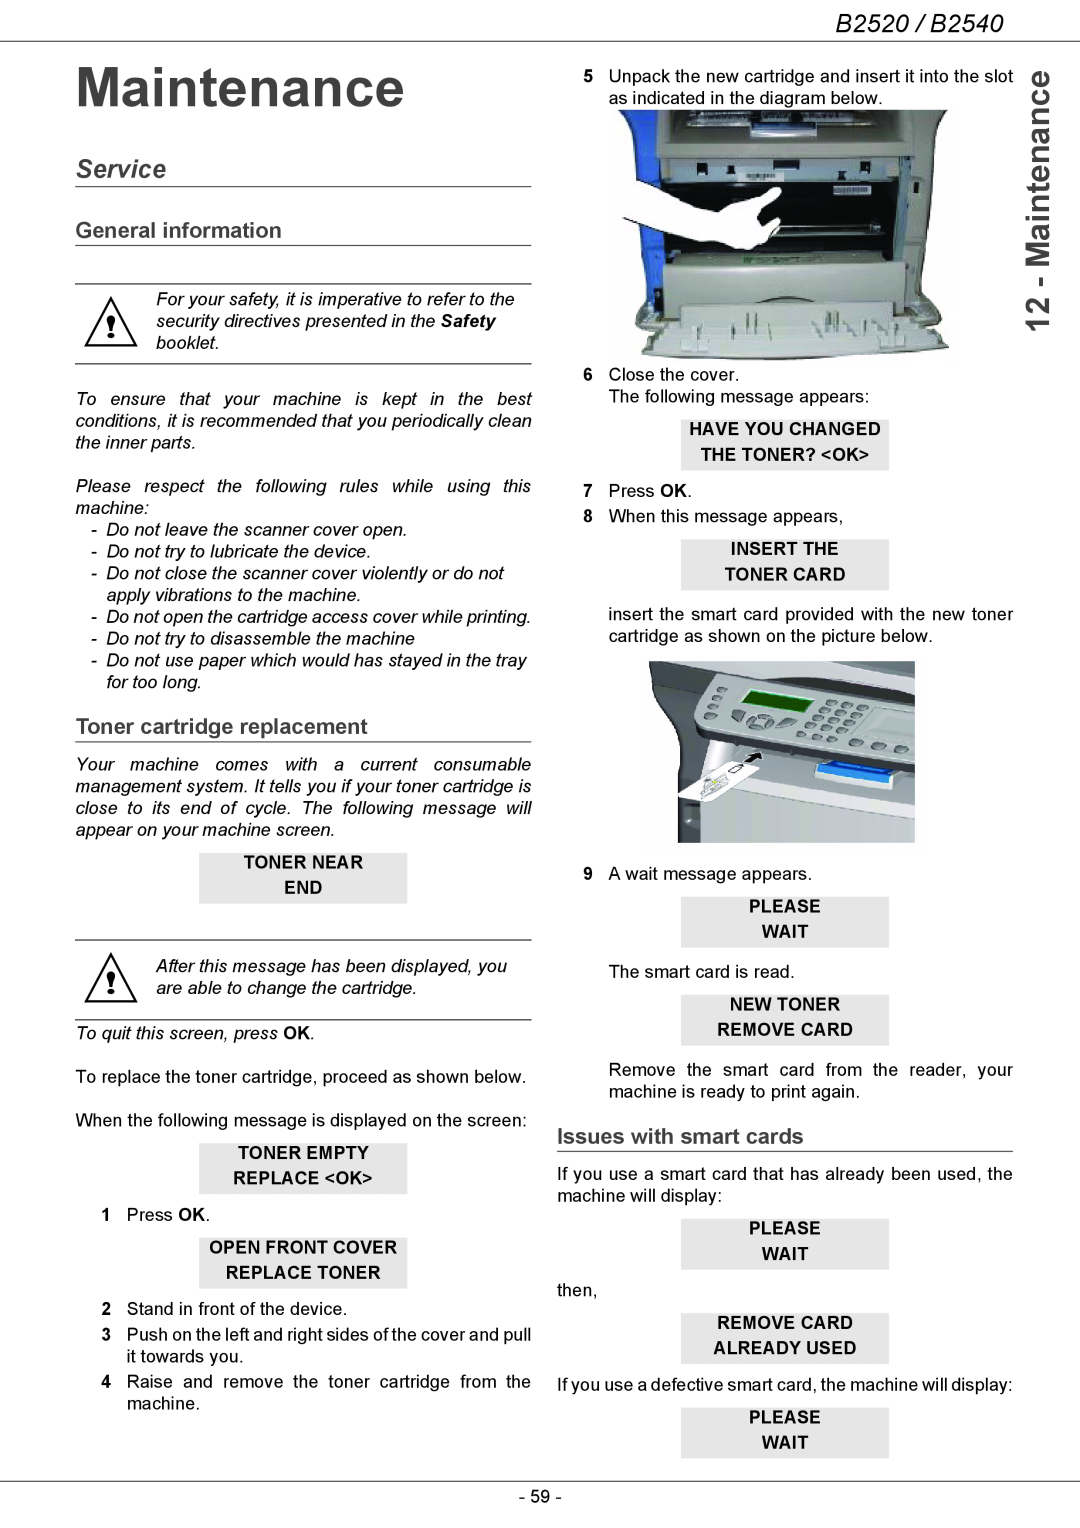 Oki B2500 Series manual Maintenance, Service, General information, Toner cartridge replacement, Issues with smart cards 